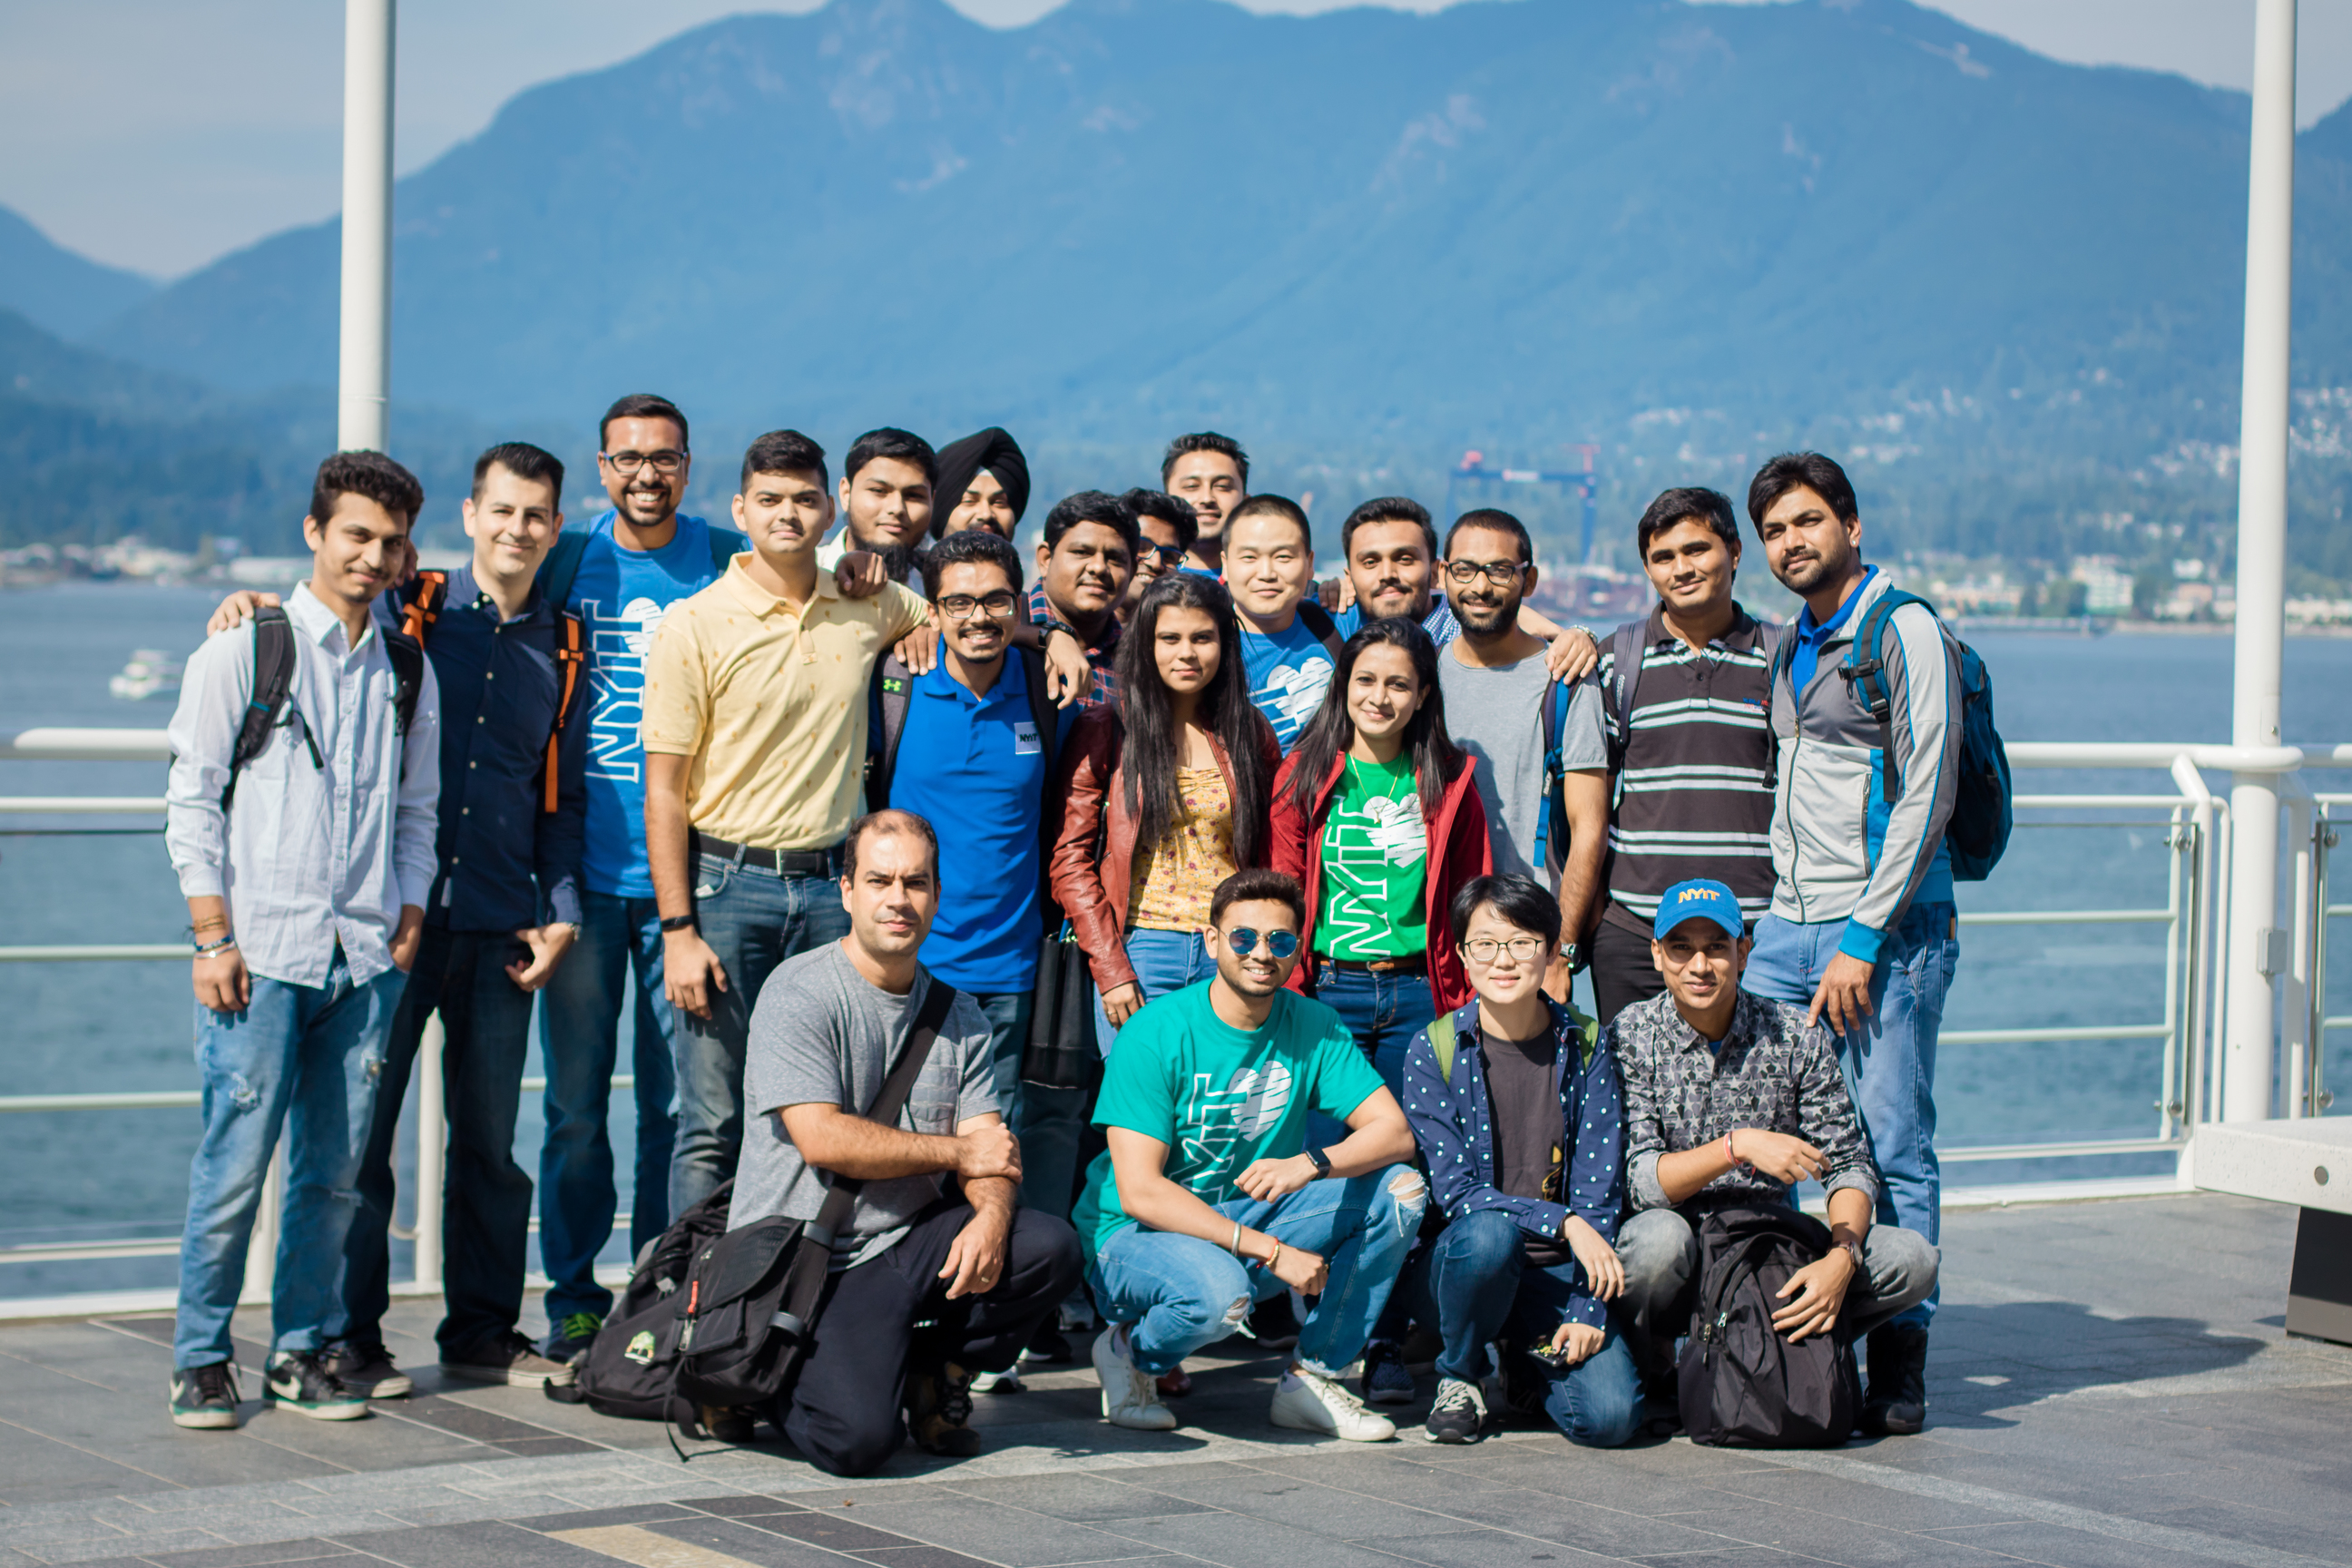 Energy Management, M.S. students outside FlyOver Canada